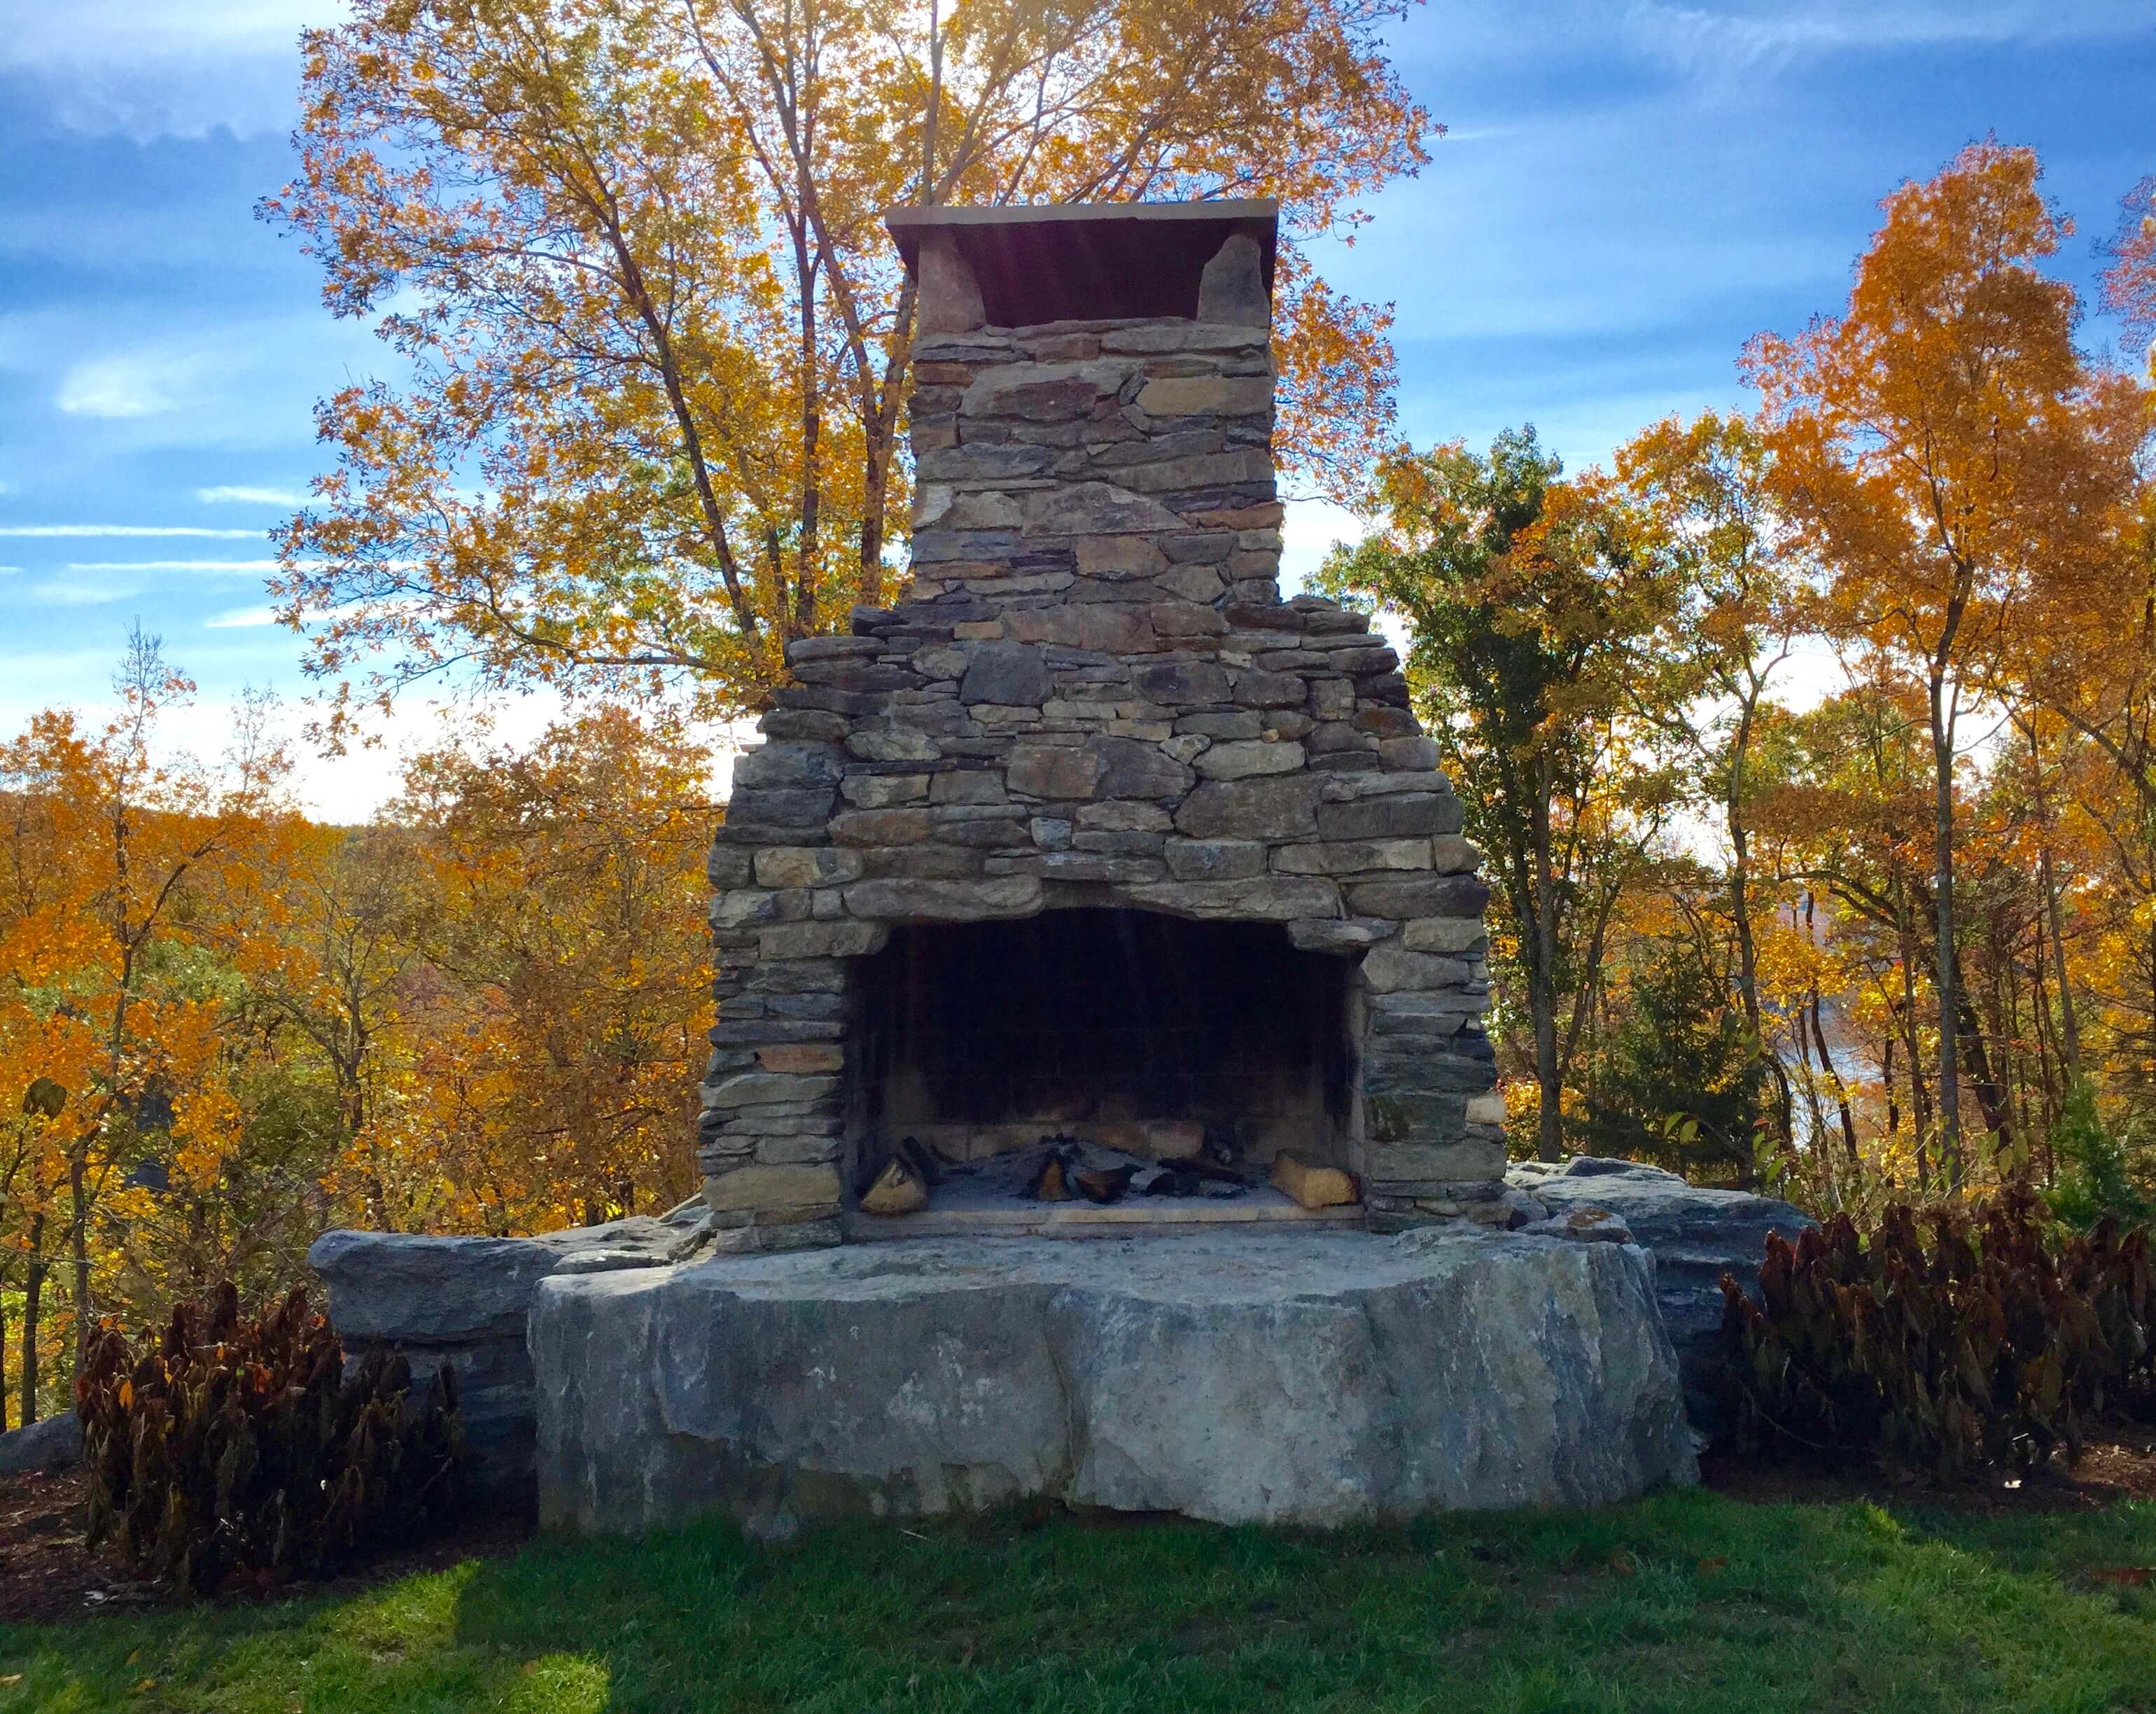 From Kit to Art - Your Outdoor Fireplace - FireFarm Living